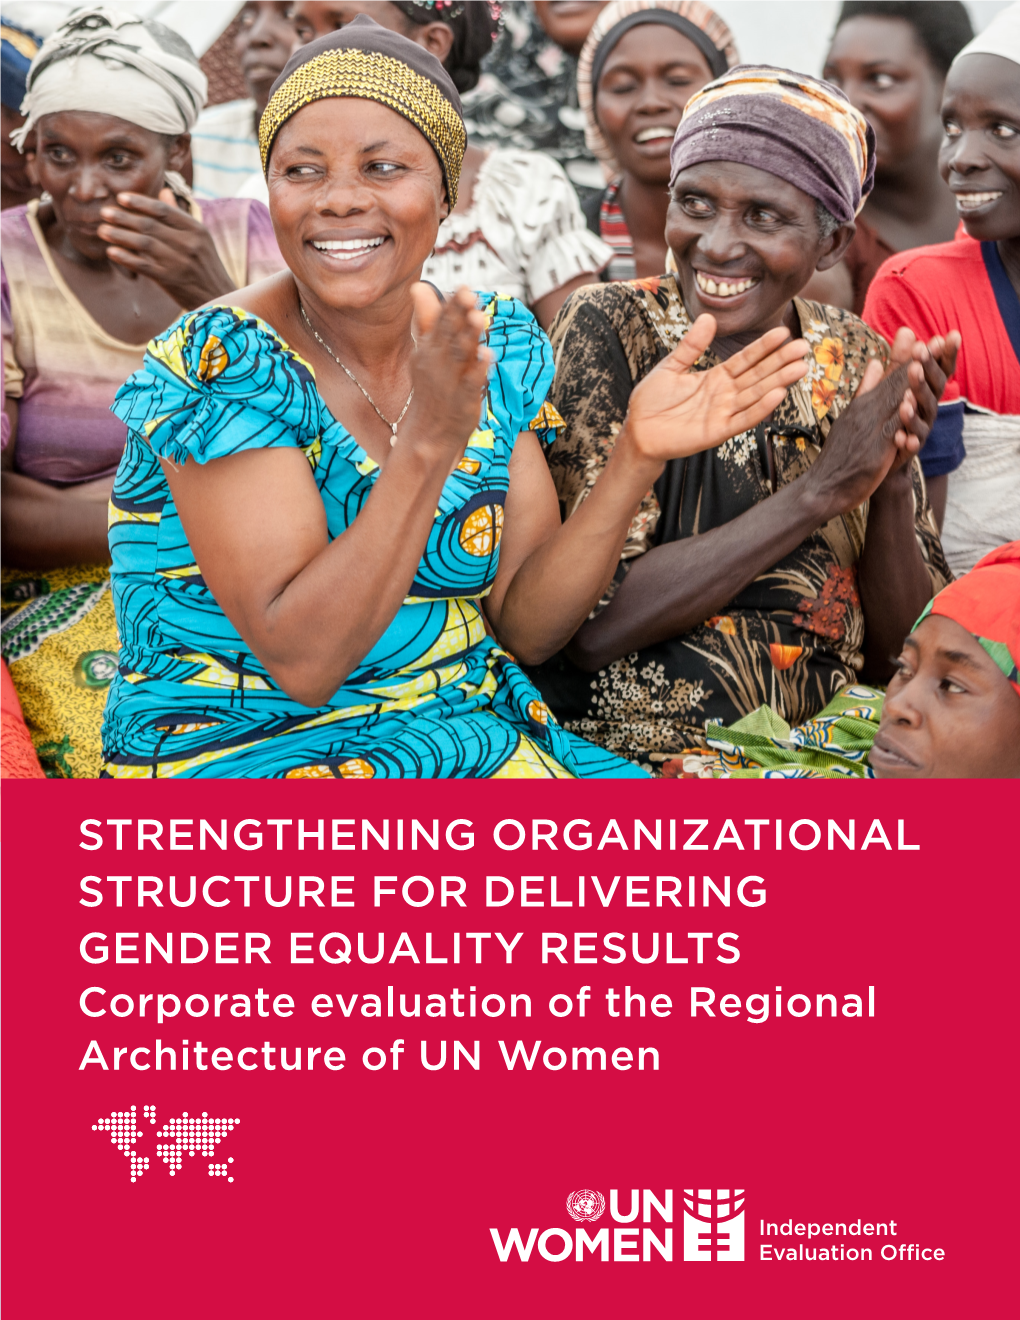 STRENGTHENING ORGANIZATIONAL STRUCTURE for DELIVERING GENDER EQUALITY RESULTS Corporate Evaluation of the Regional Architecture of UN Women